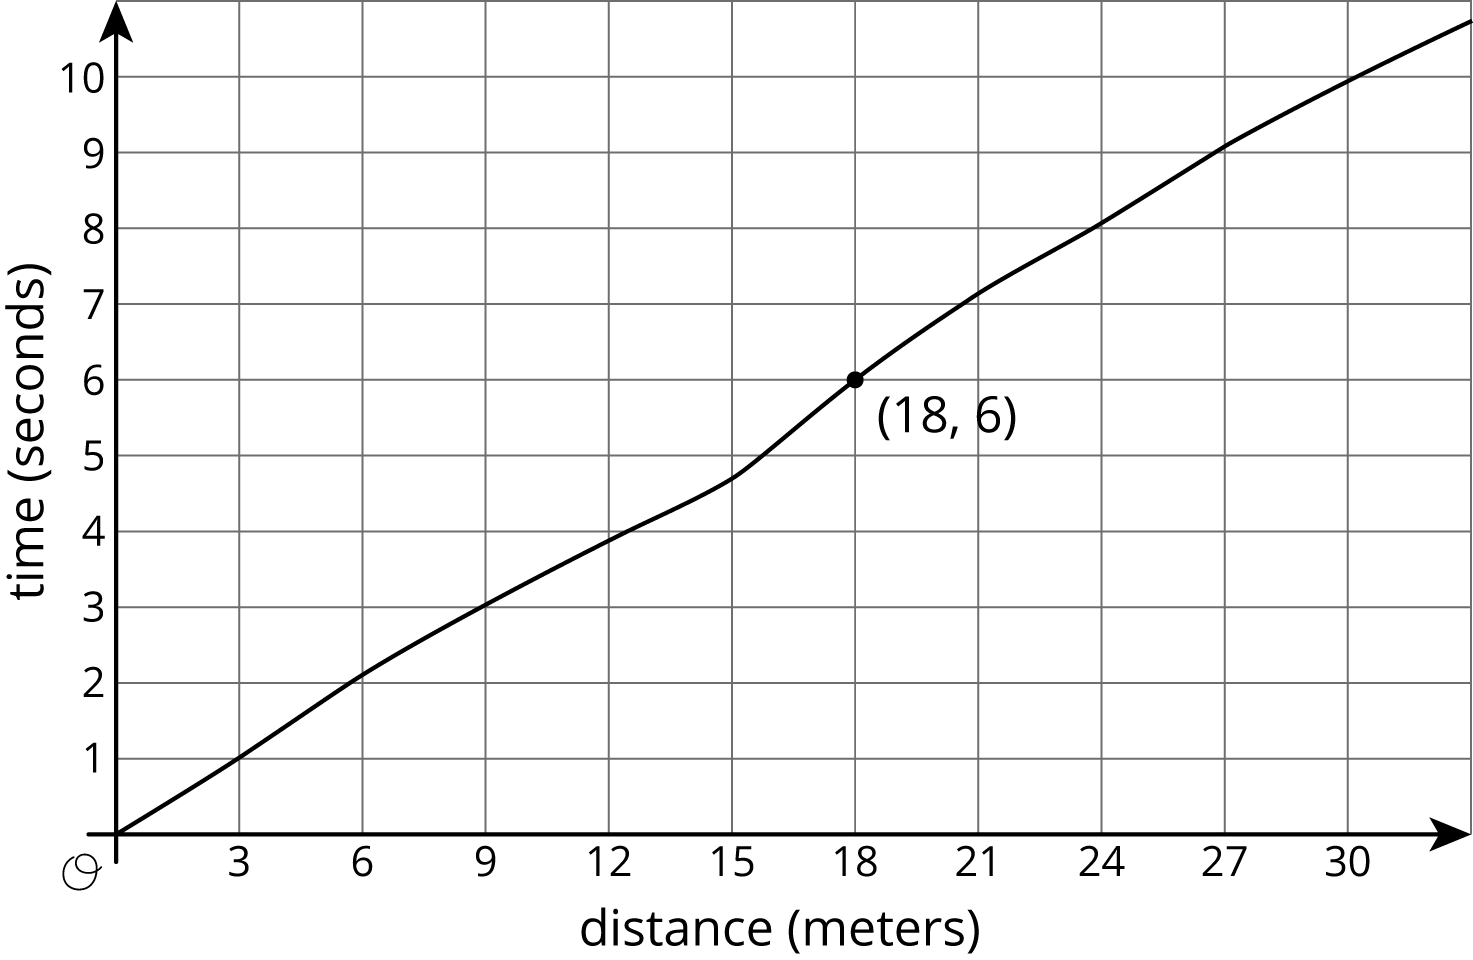 A graph of a function in the coordinate plane with the origin labeled "O". The horizontal axis is labeled “distance in meters” and the numbers 0 through 30, in increments of 3, are indicated. The vertical axis is labeled “time in seconds” and the numbers 0 through 10 are indicated. The function is approximately linear. It starts at the origin and moves upward and to the right, passing through the points with the coordinates 3 comma 1, 9 comma 3, 18 comma 6, and 30 comma 10.